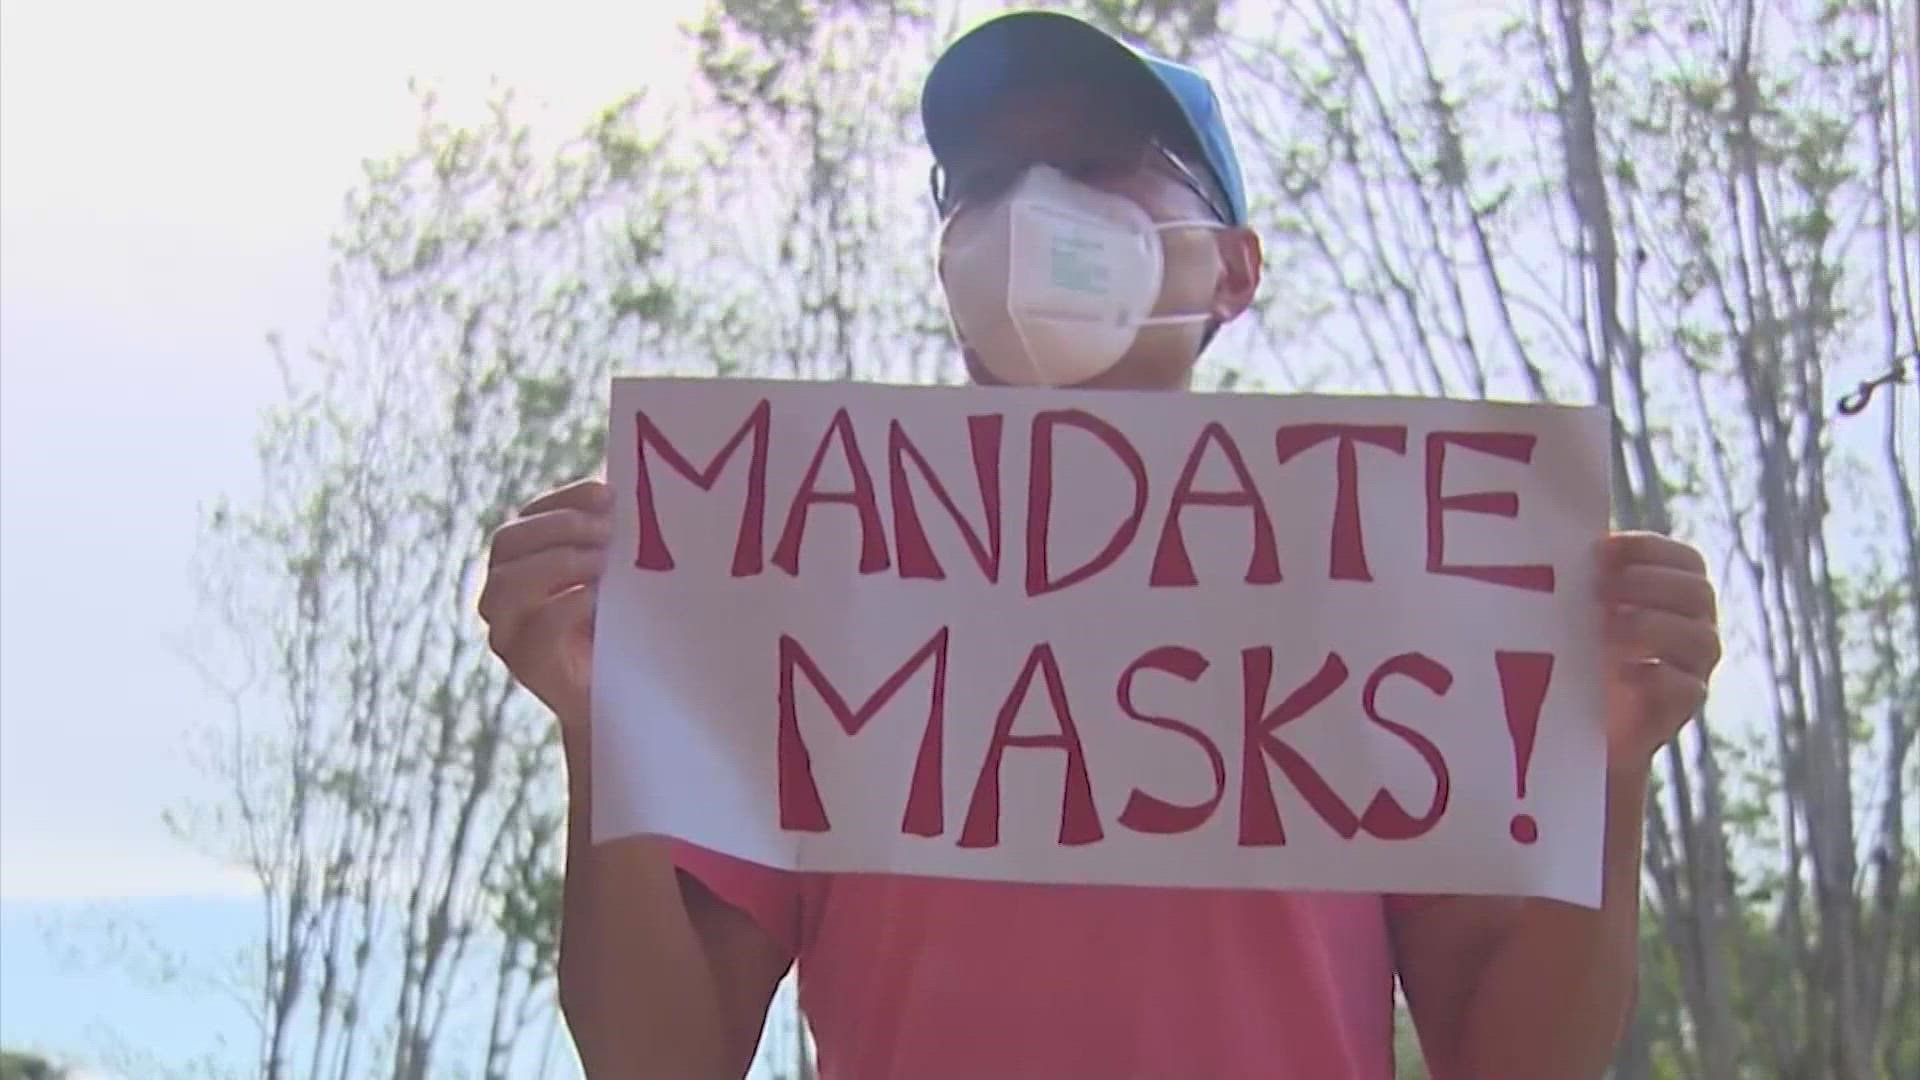 Some parents are concerned over Governor Greg Abbot's 'executive order' banning mask mandates, leaving several Texas school districts to defy the Governor's order.